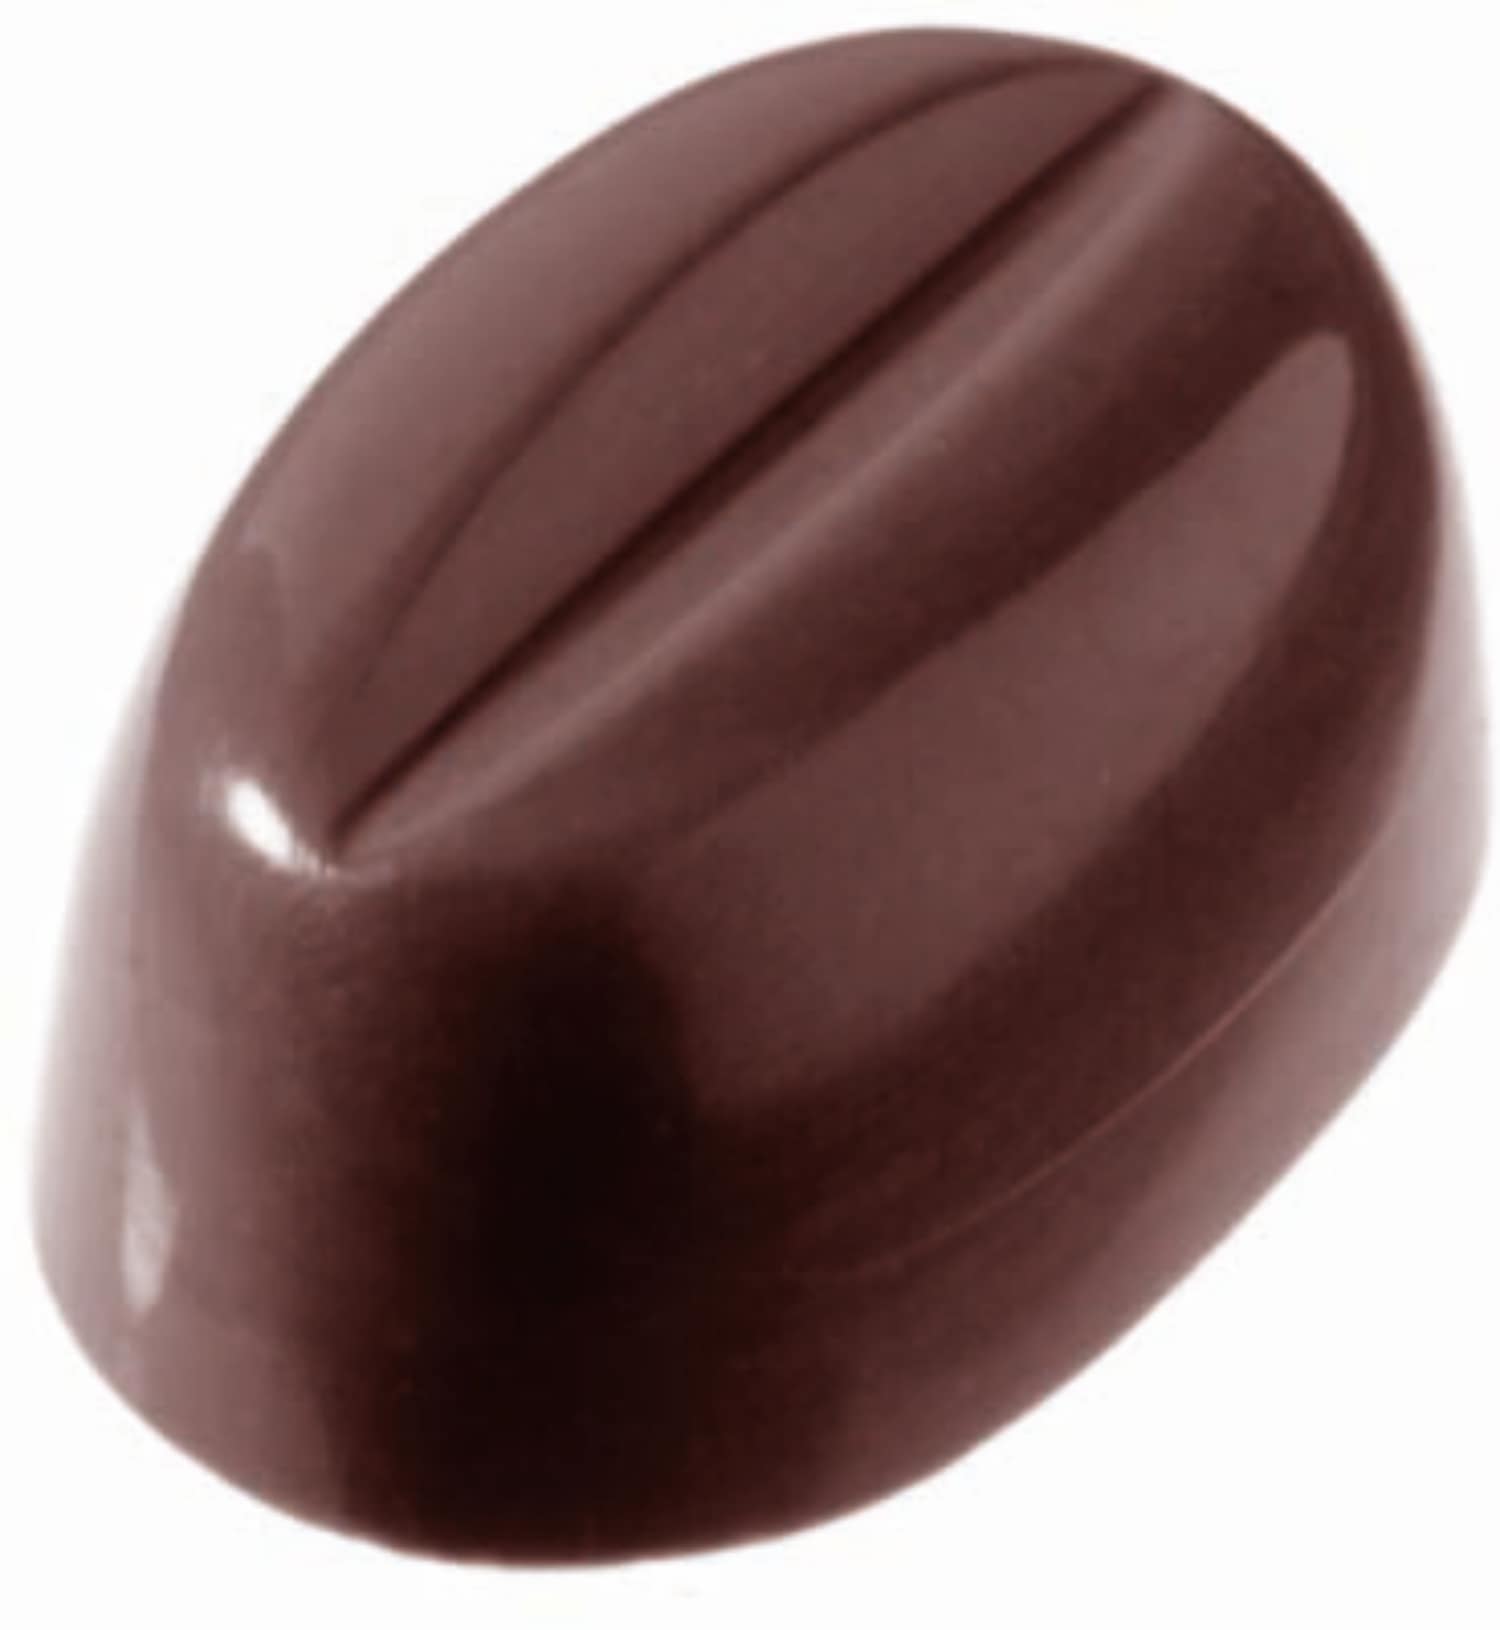 Chocolate mould "Coffee bean" 421529